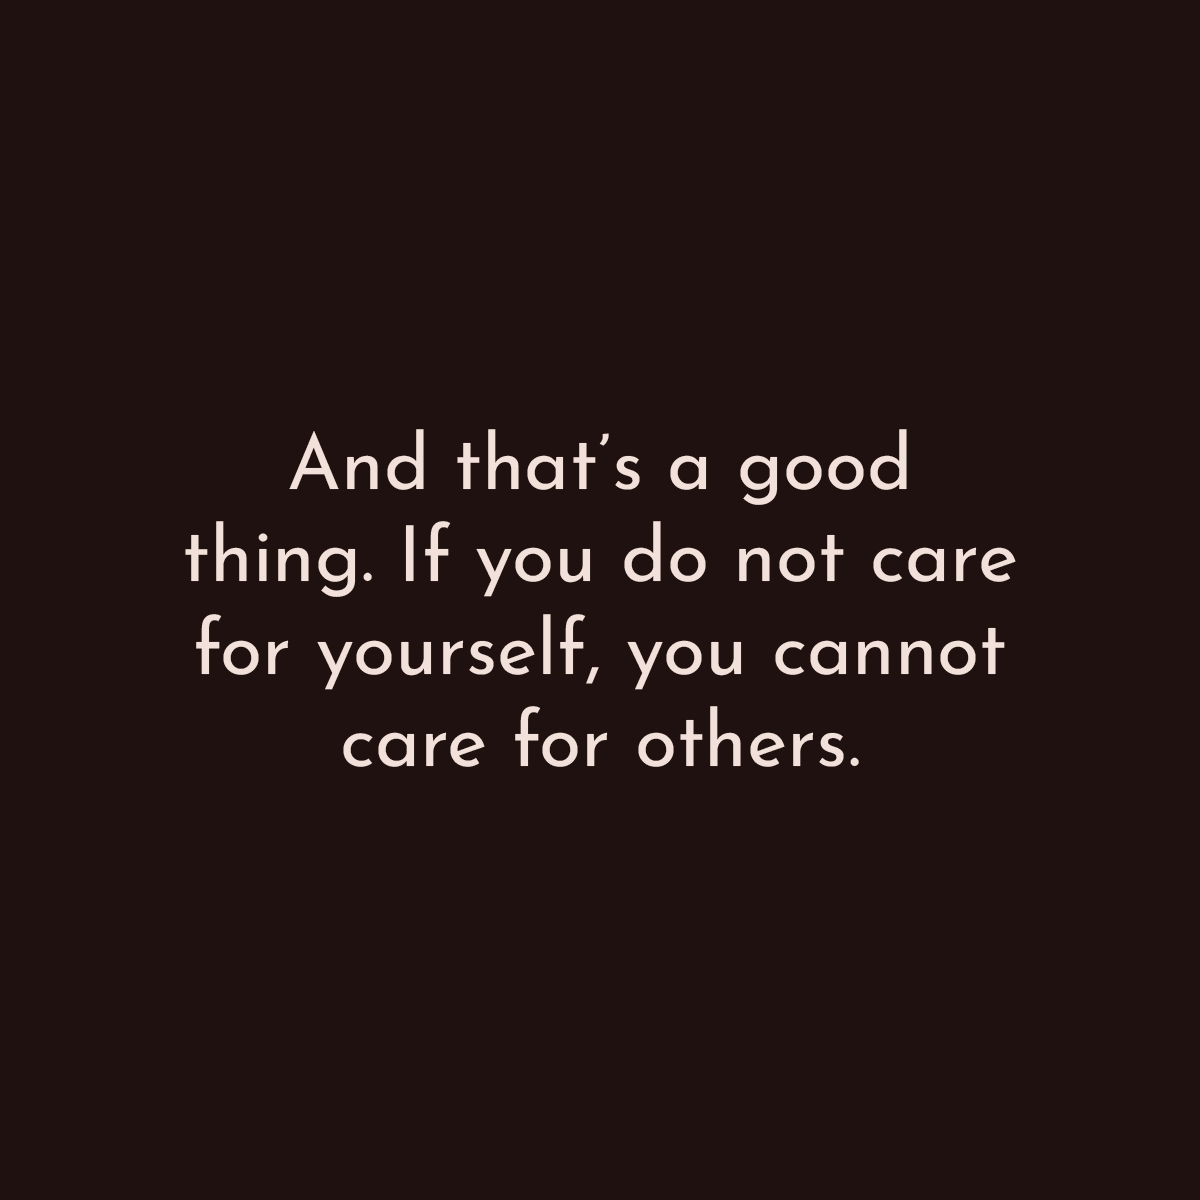 And that's a good thing. If you do not care for yourself, you cannot care for others.